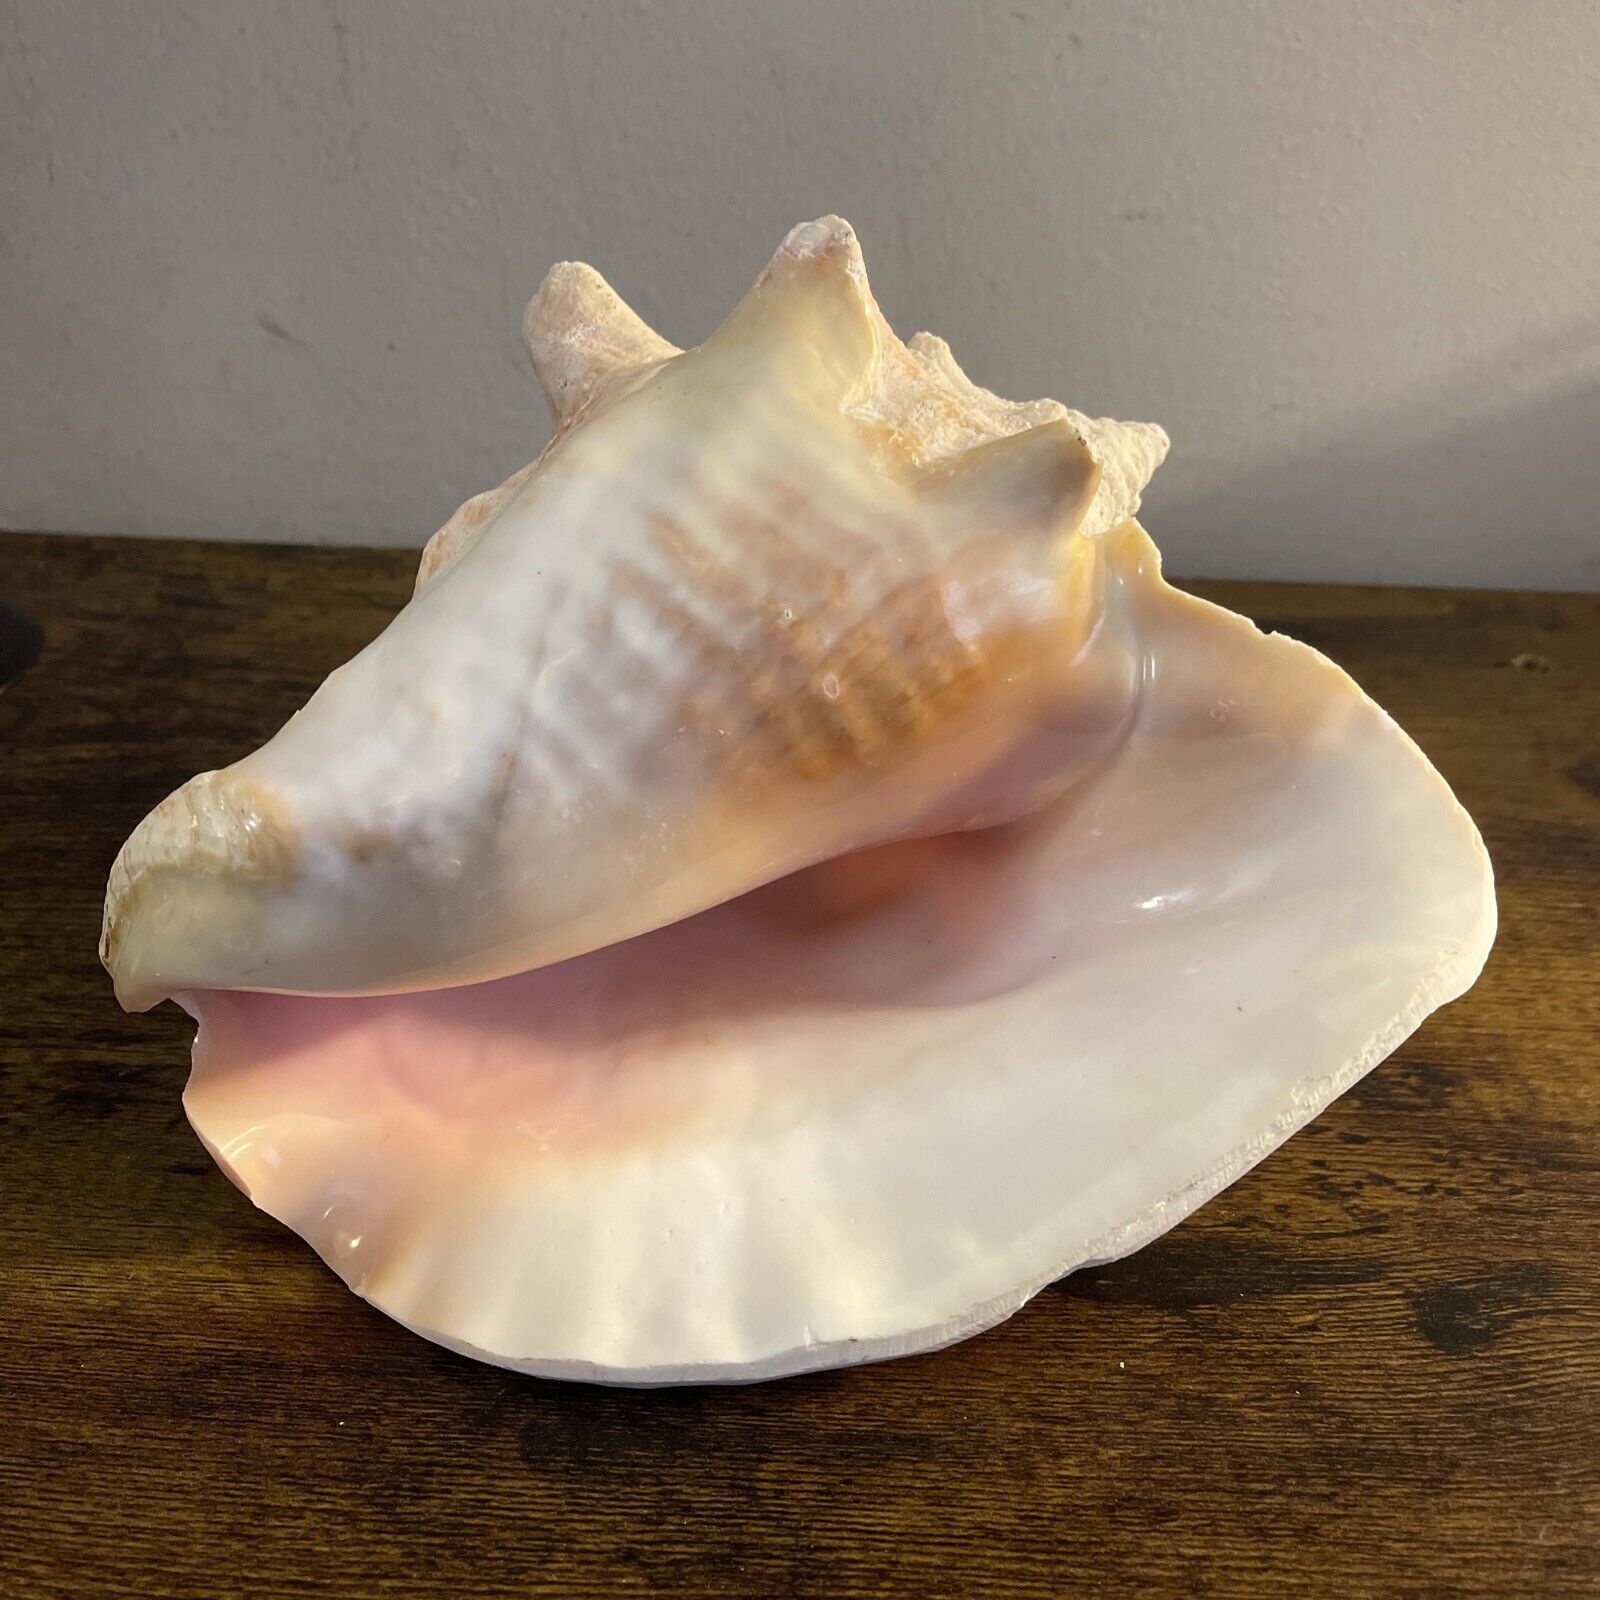 NATURAL QUEEN CONCH SHELL - LARGE, CLEAN - PINK, BEIGE - 8” LONG - BEAUTIFUL